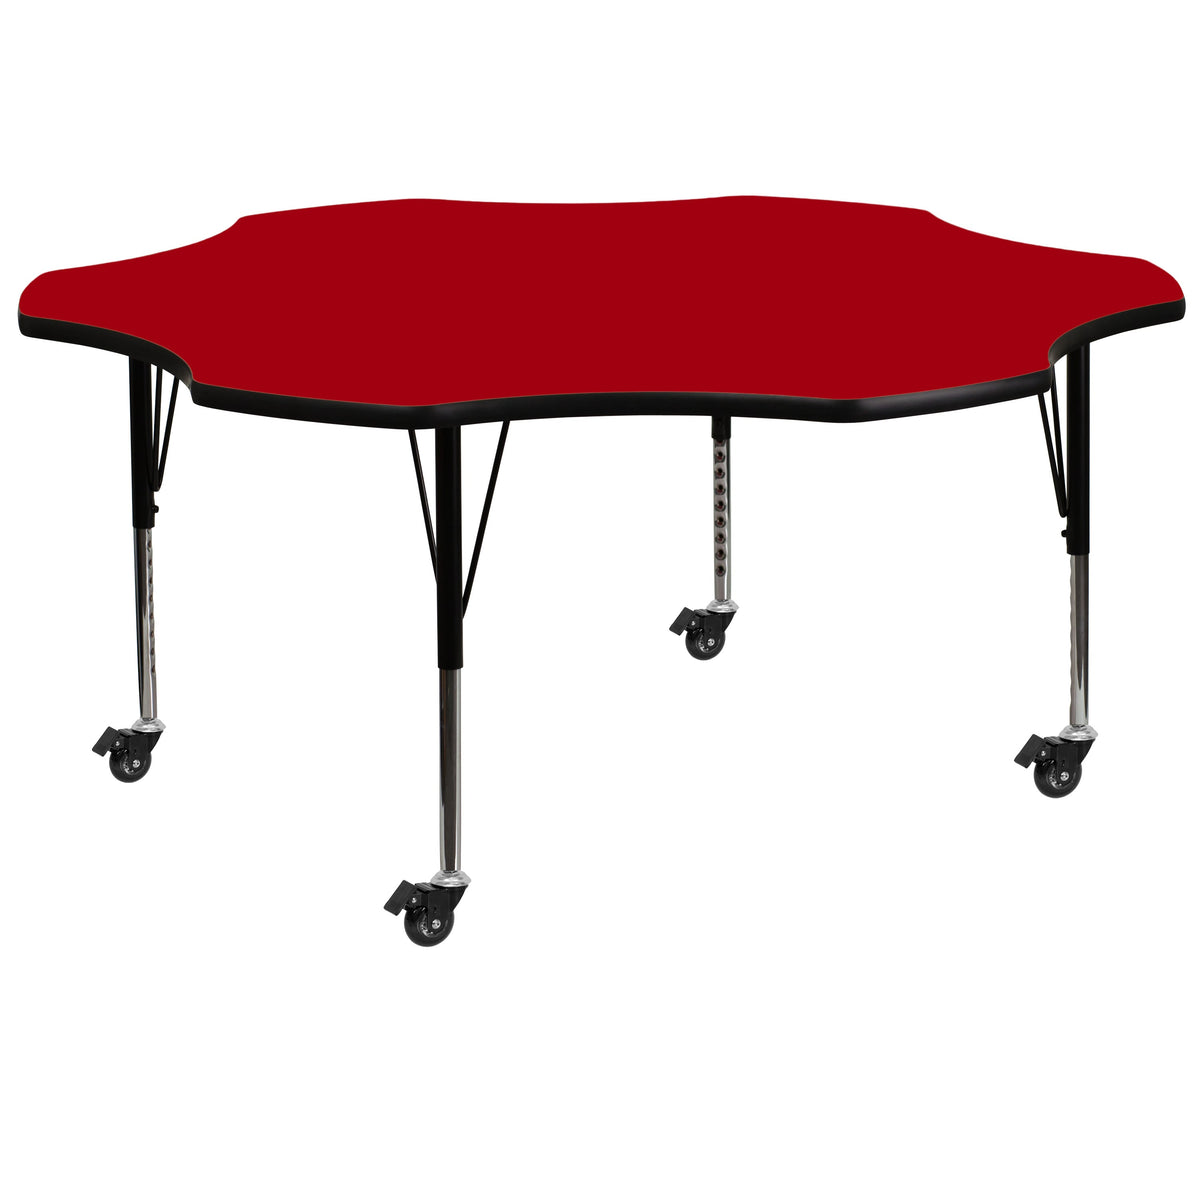 Red |#| Mobile 60inch Flower Red Thermal Laminate Activity Table - Height Adjustable Legs